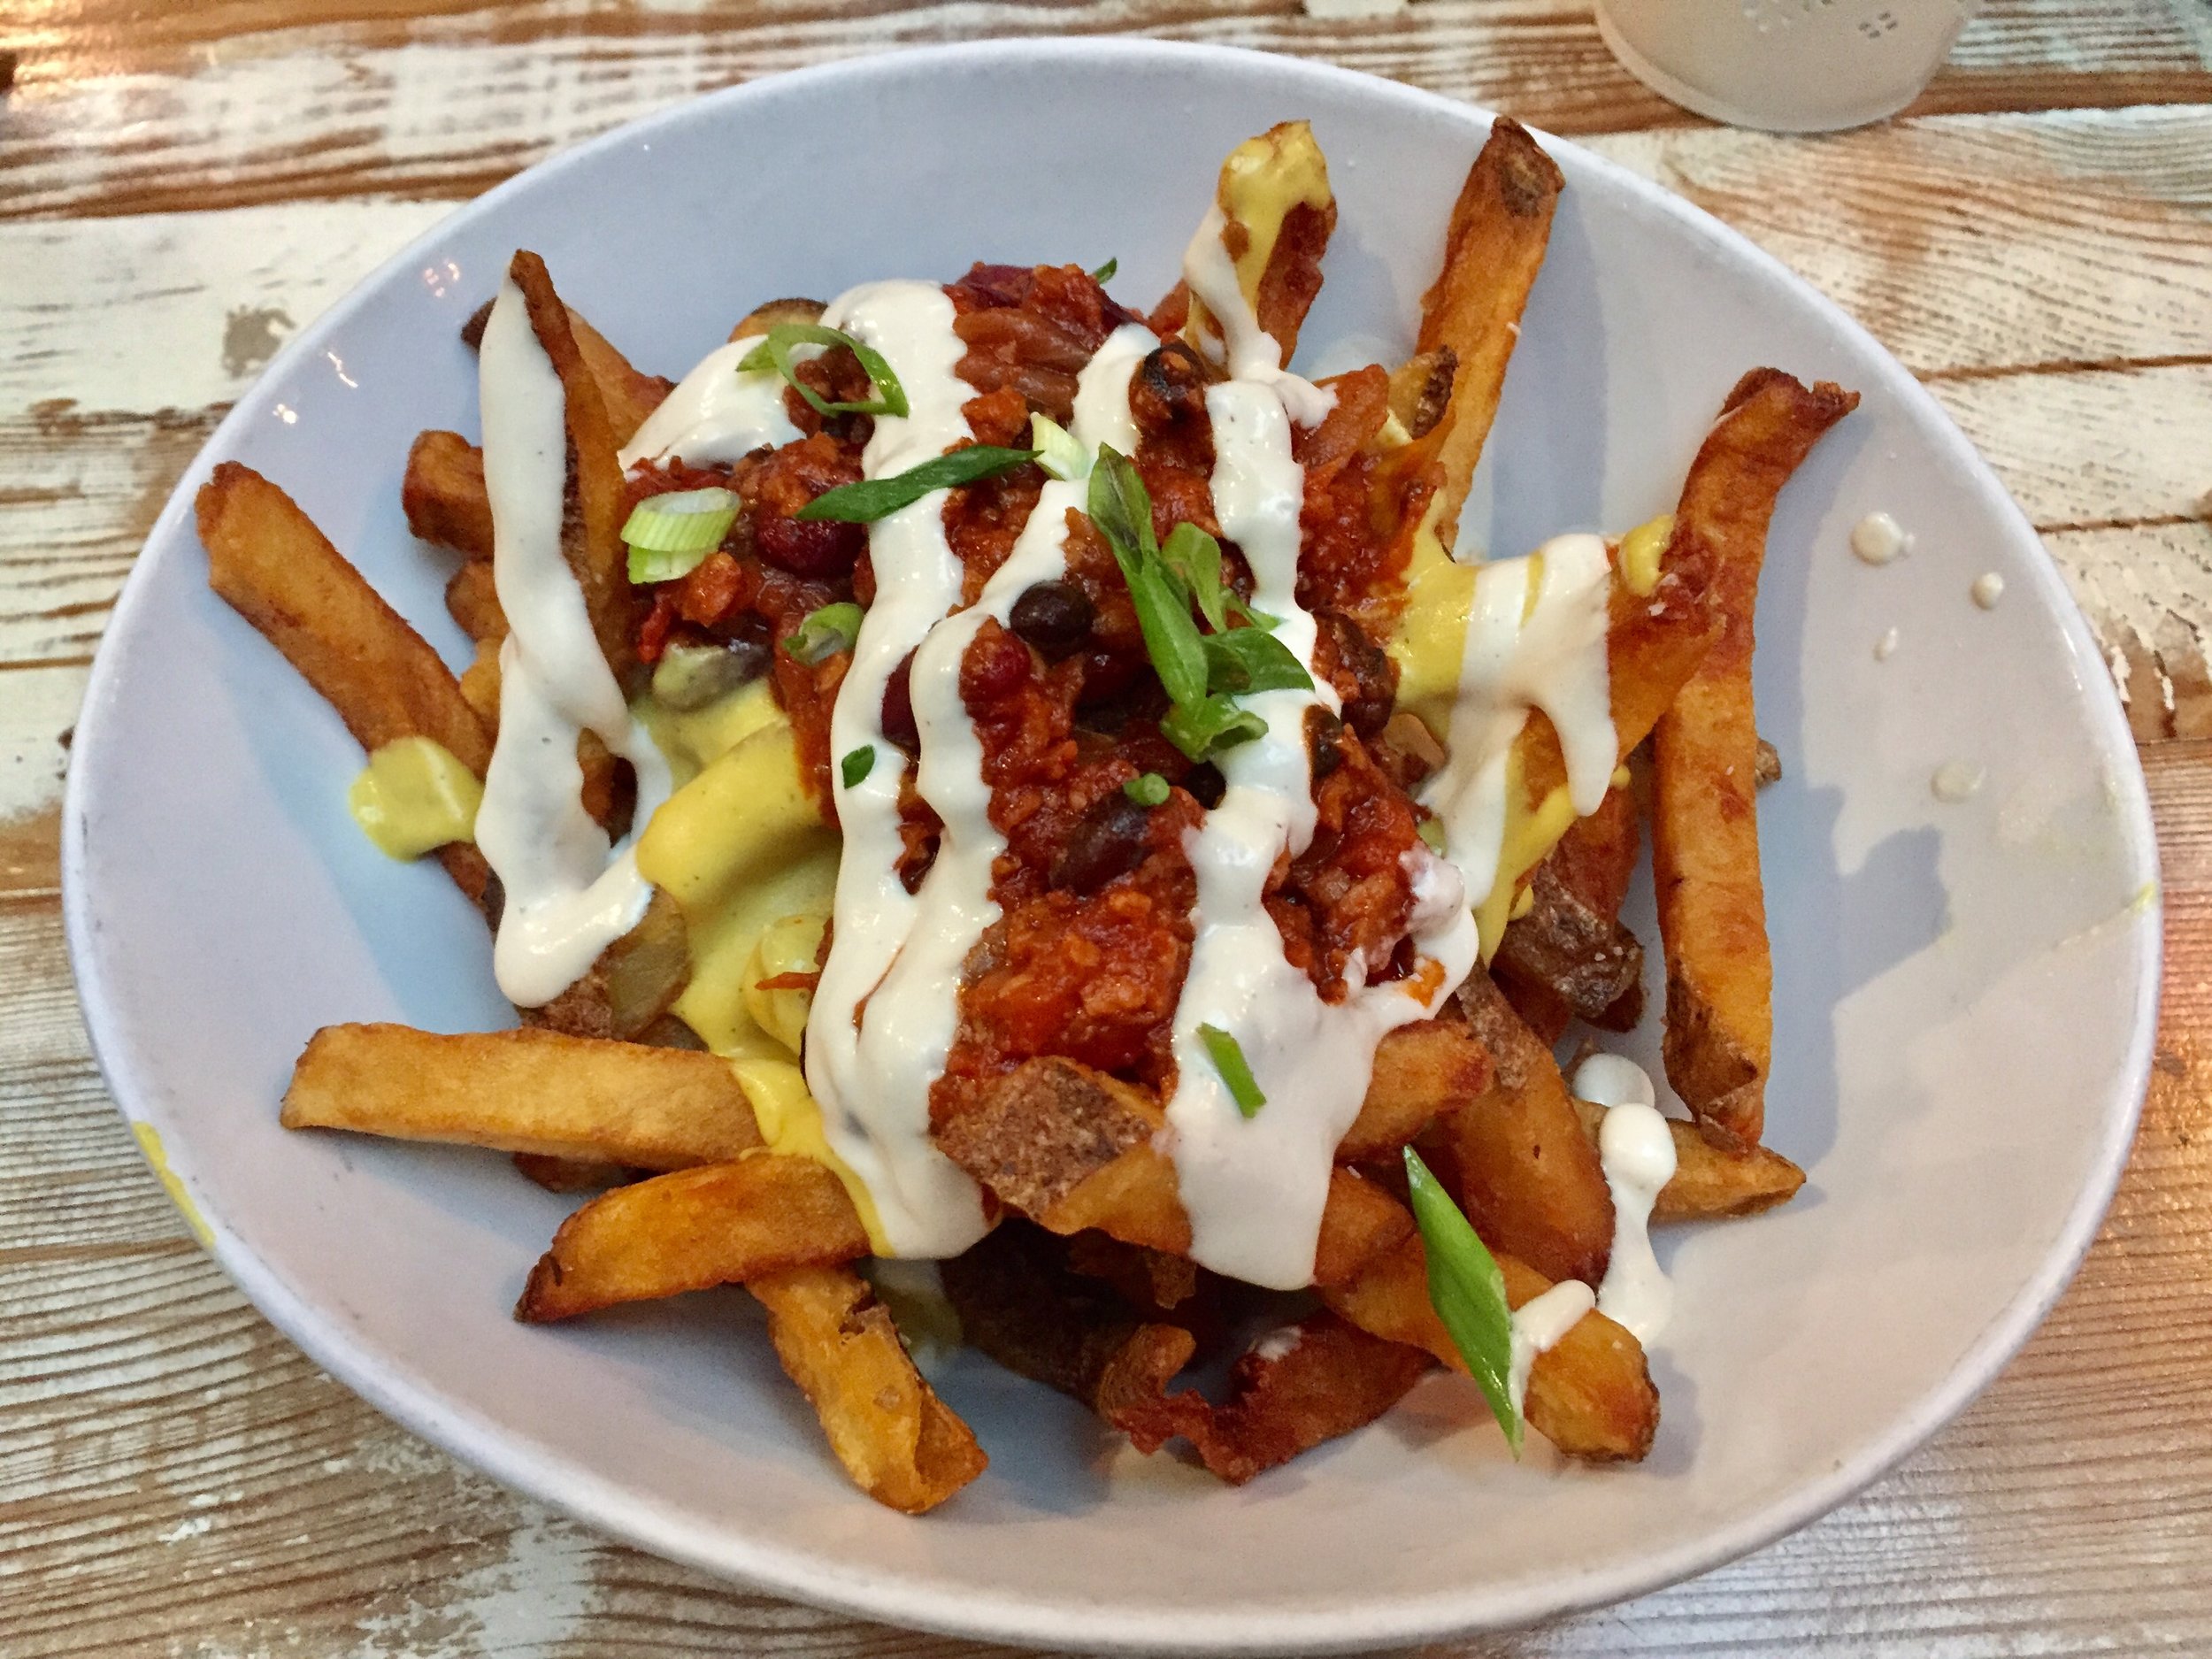 Vegan chili cheez fries from Meet in Gastown, Vancouver